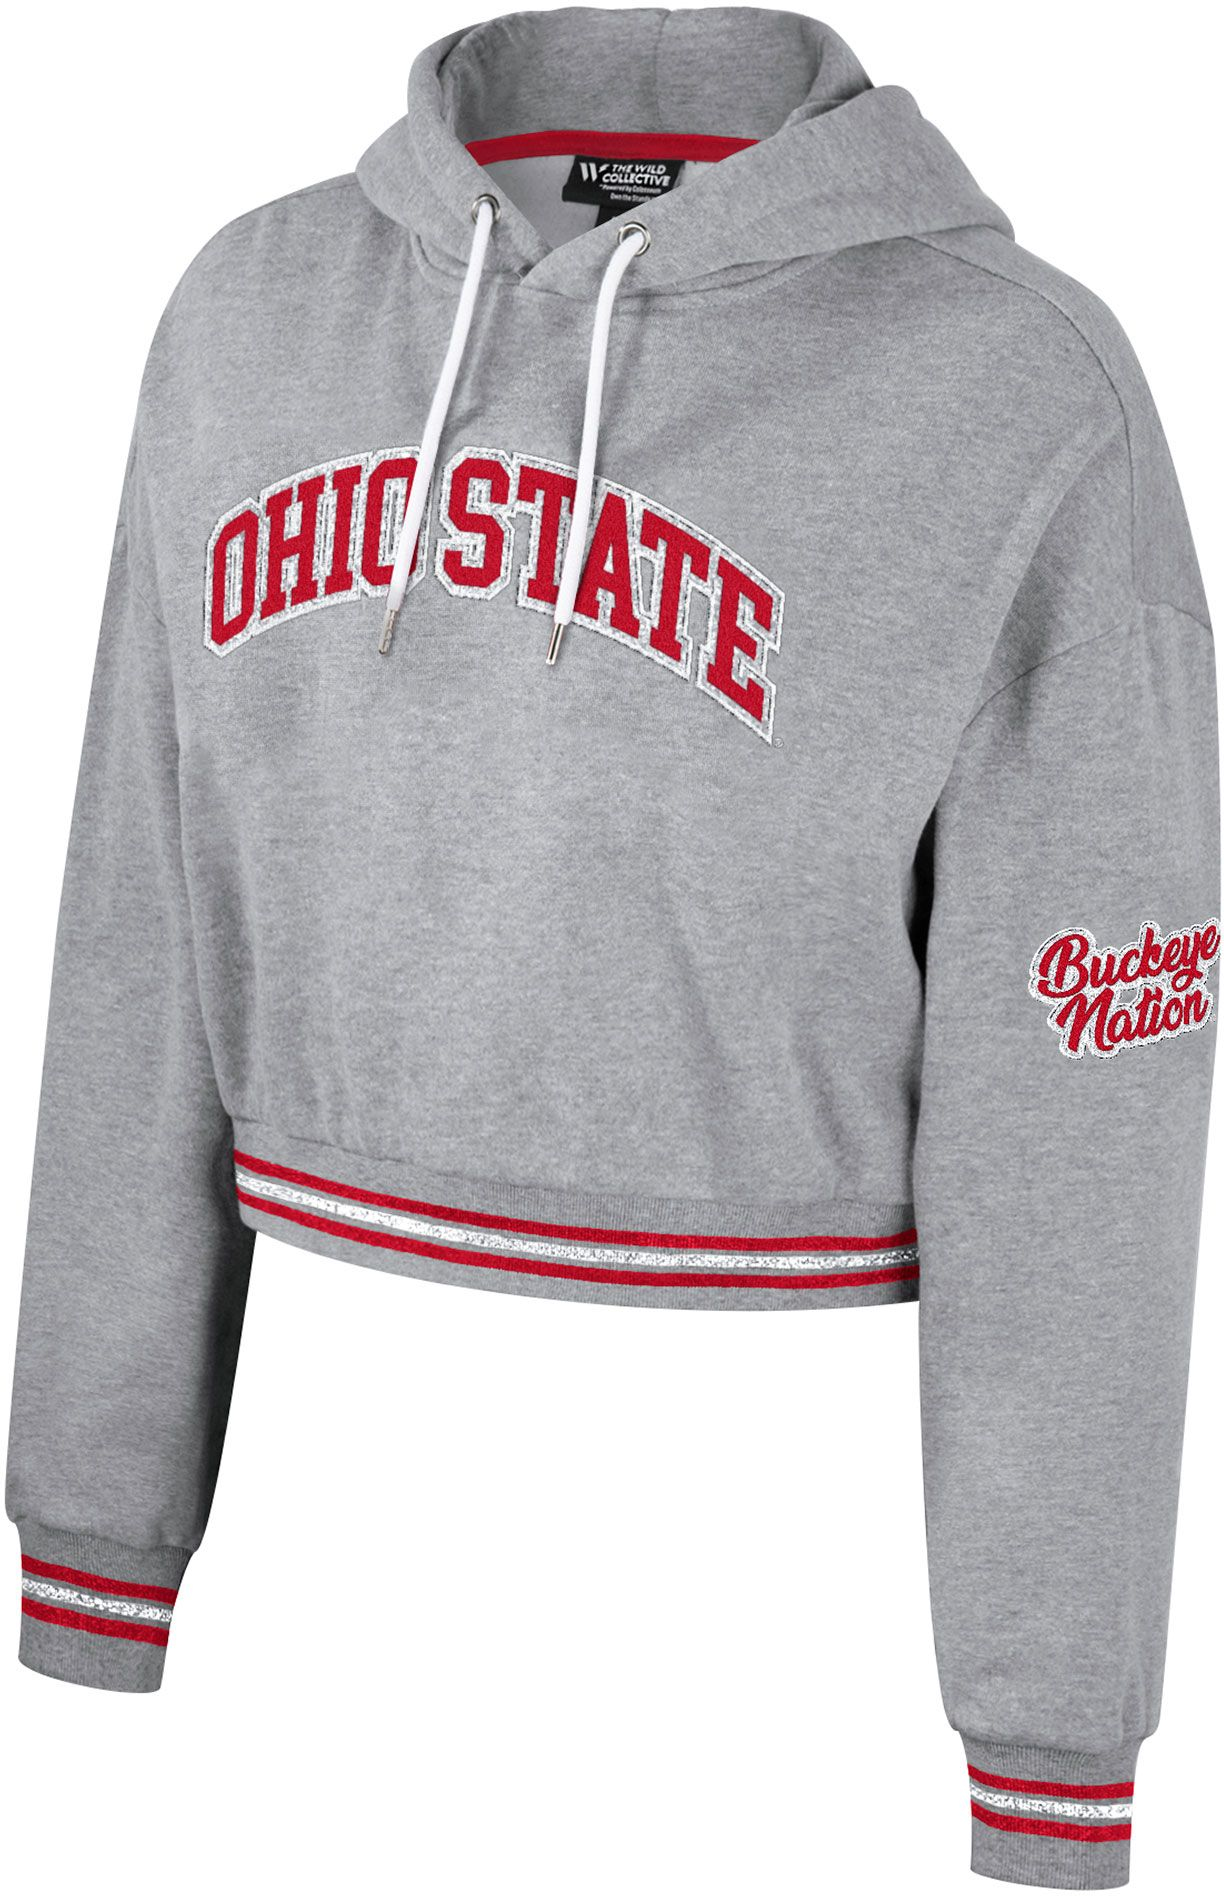 The Wild Collective Women's Ohio State Buckeyes Grey Cropped Pullover Hoodie, XL, Gray